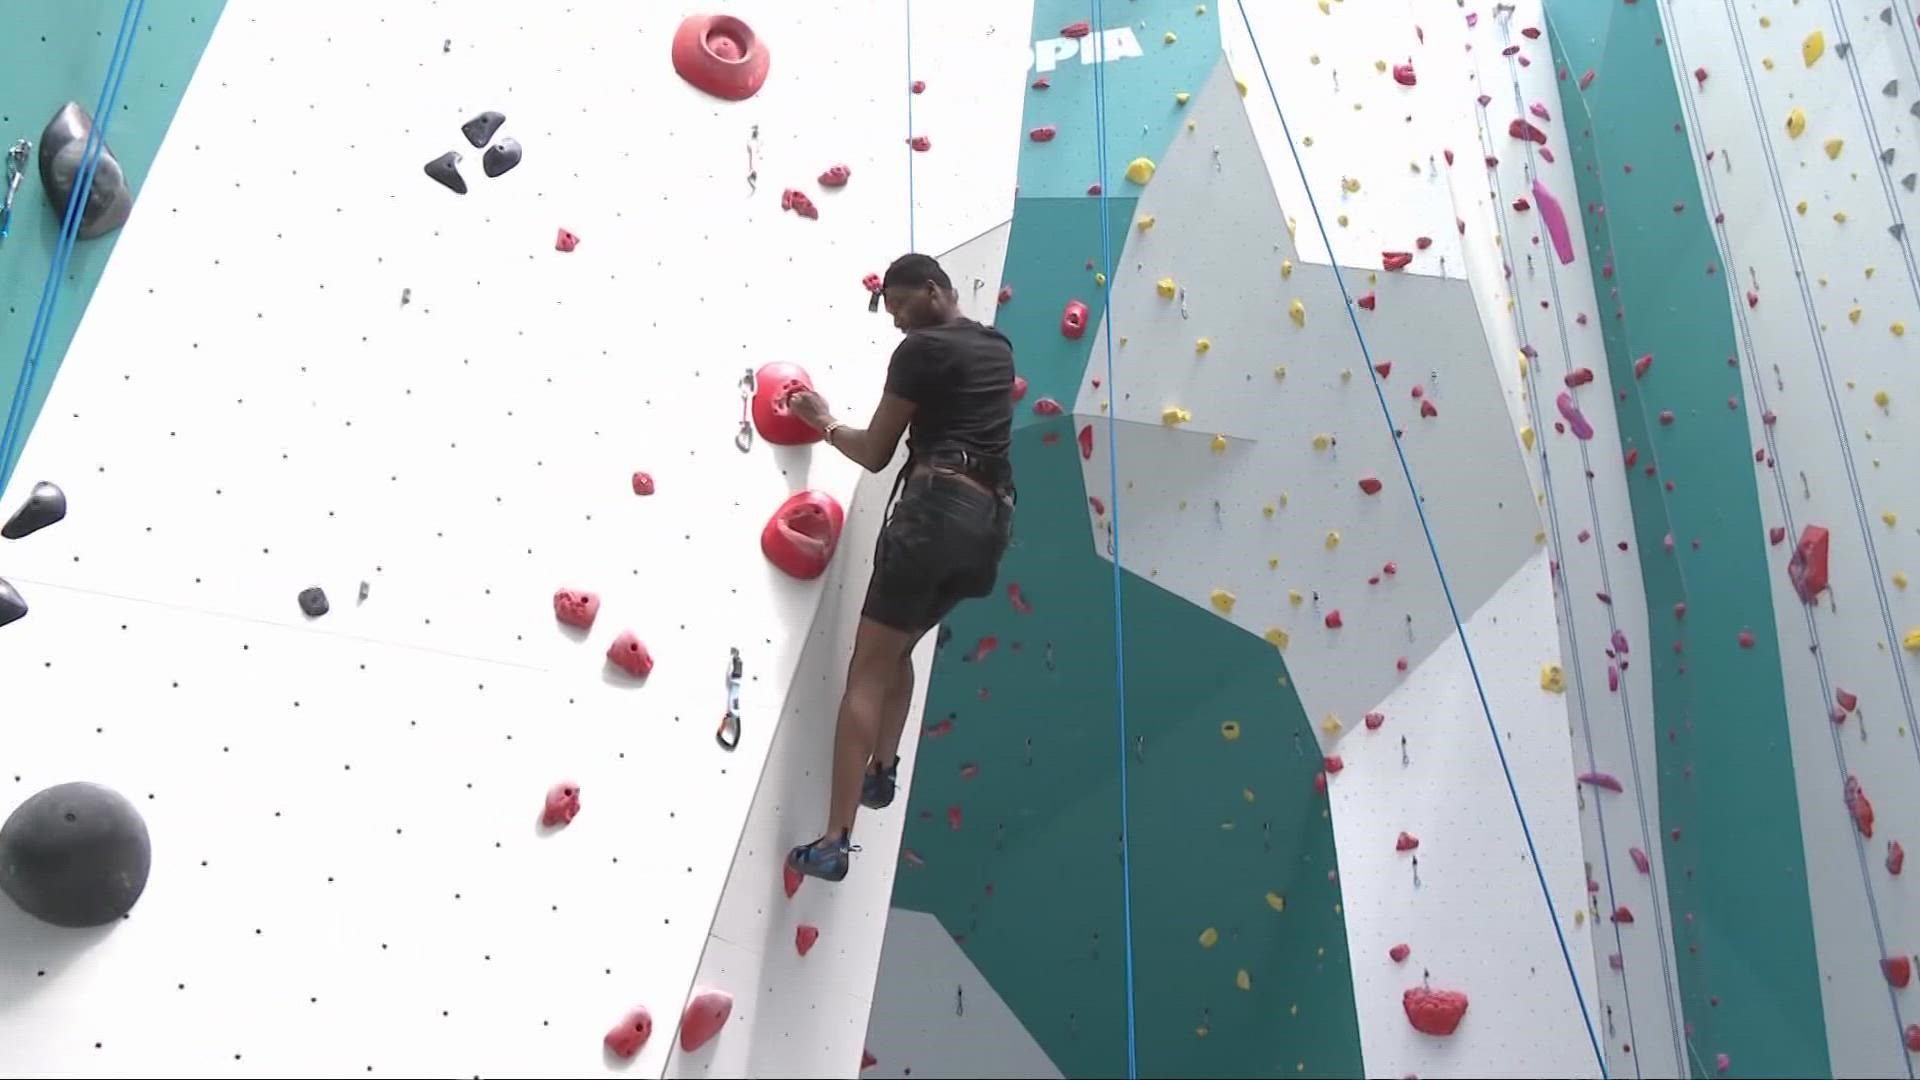 The gym is reaching new heights with its state-of-the-art climbing areas!